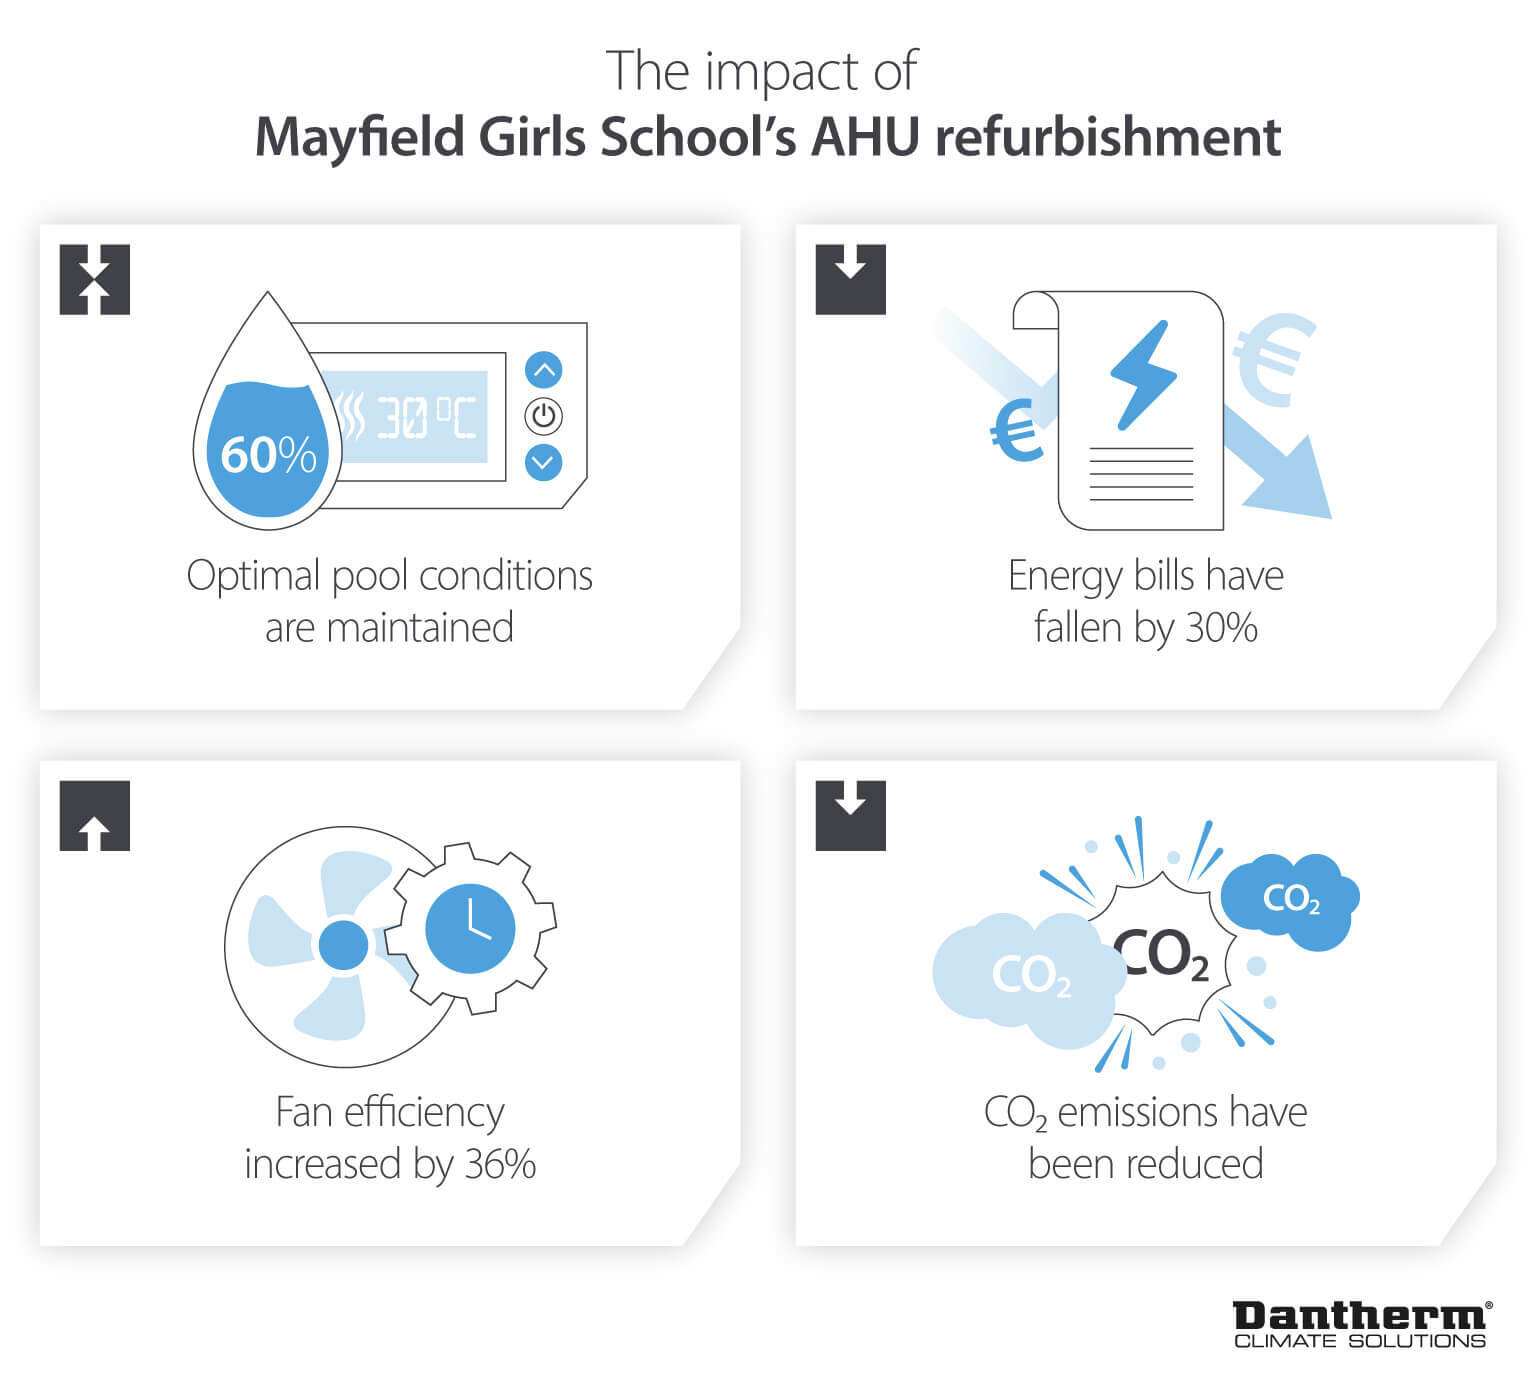 Efficiency and emissions benefits of refurbishing the air handling unit for Mayfield Girls School - Dantherm infographic image